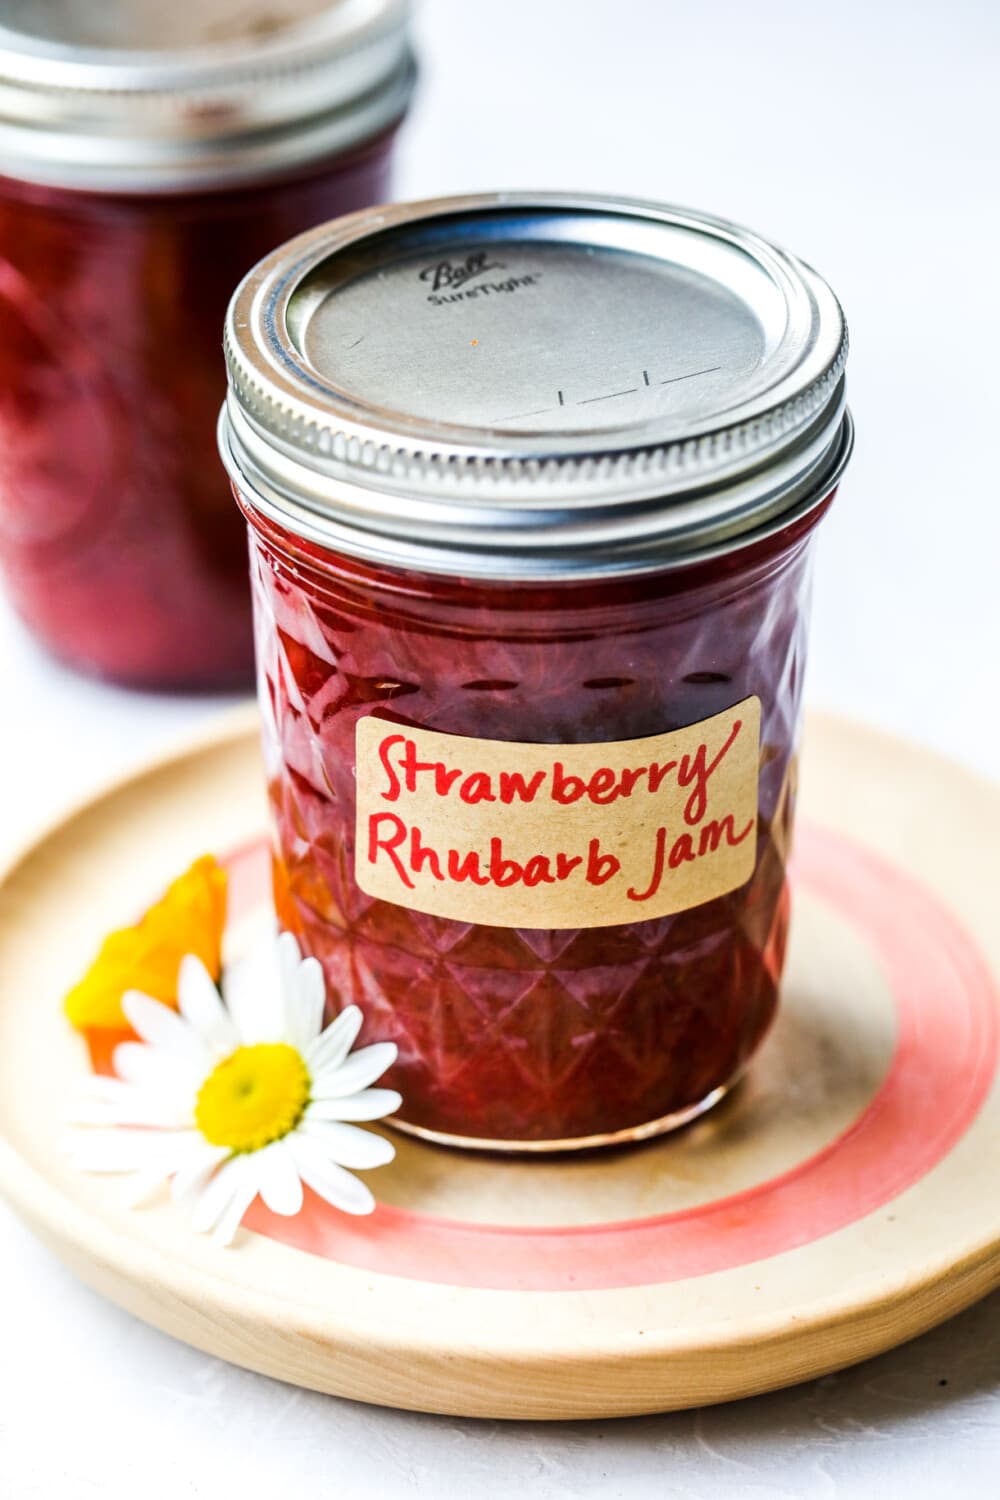 strawberry rhubarb jam in glass jars on wooden coaster